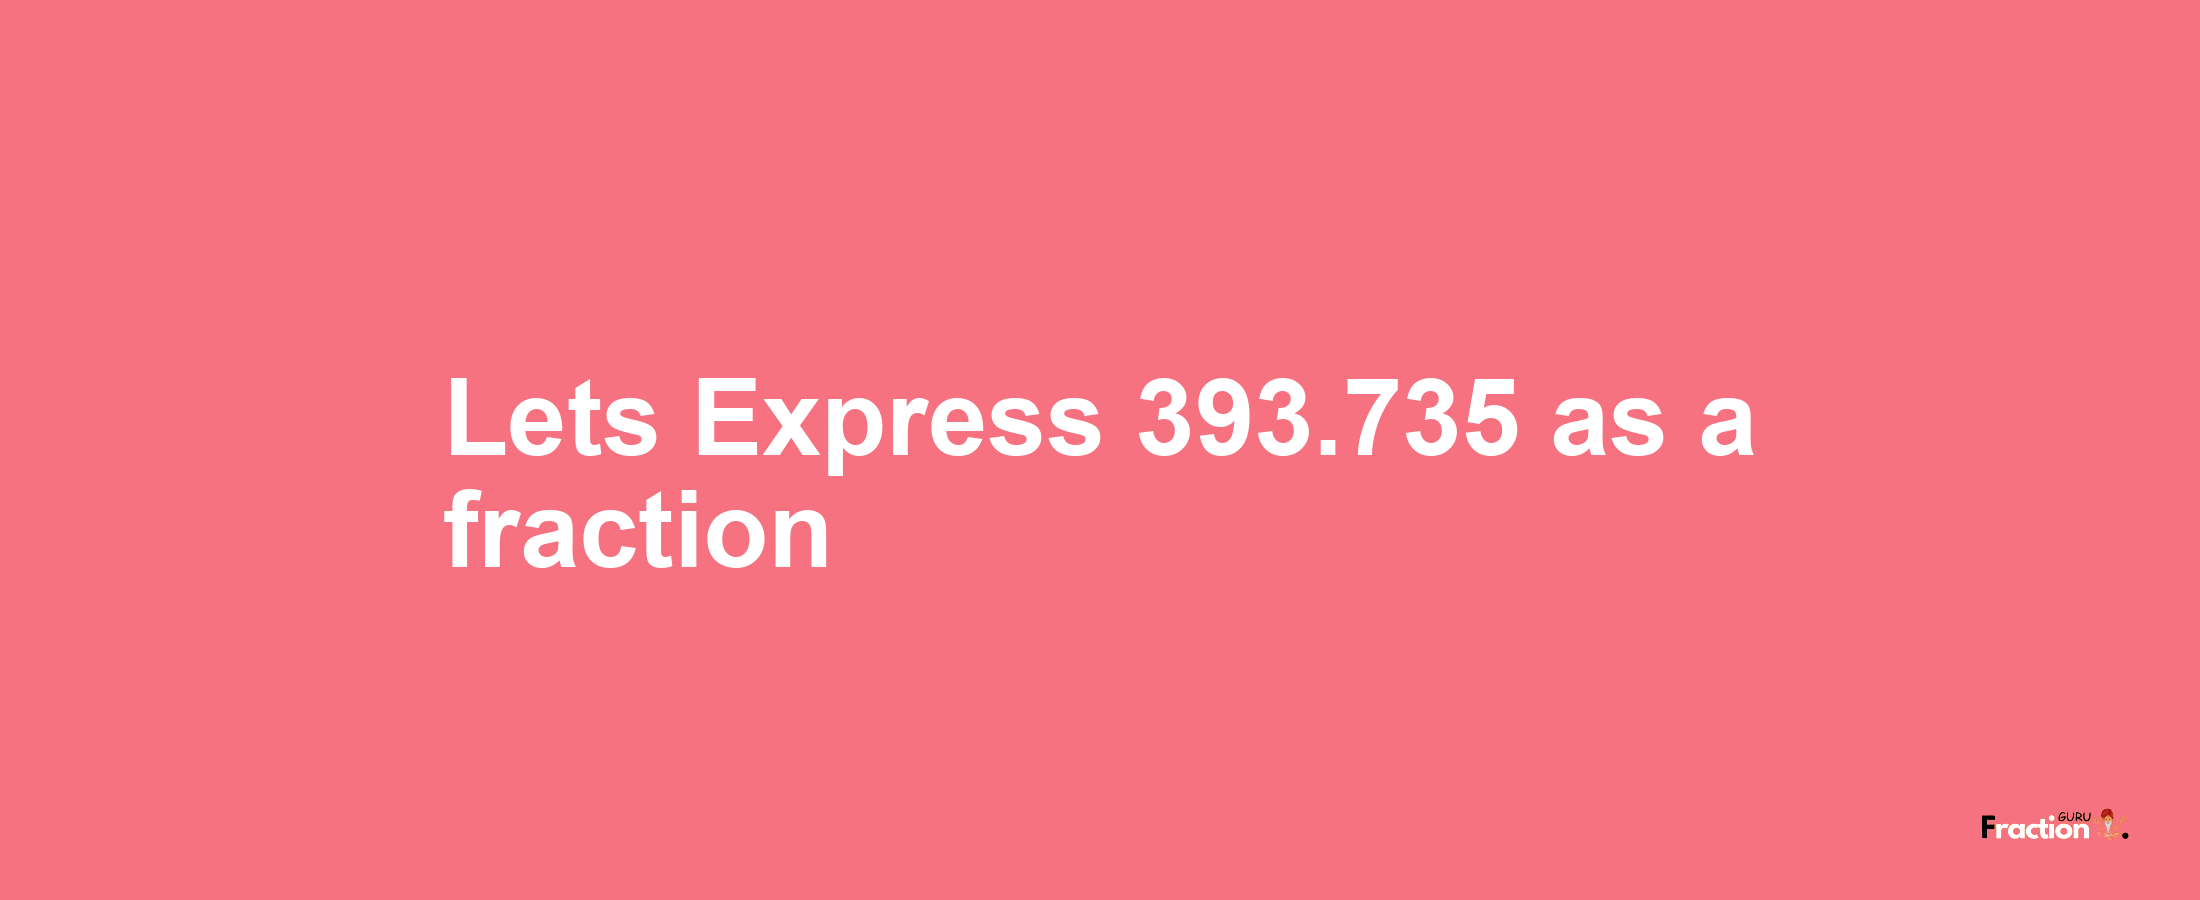 Lets Express 393.735 as afraction